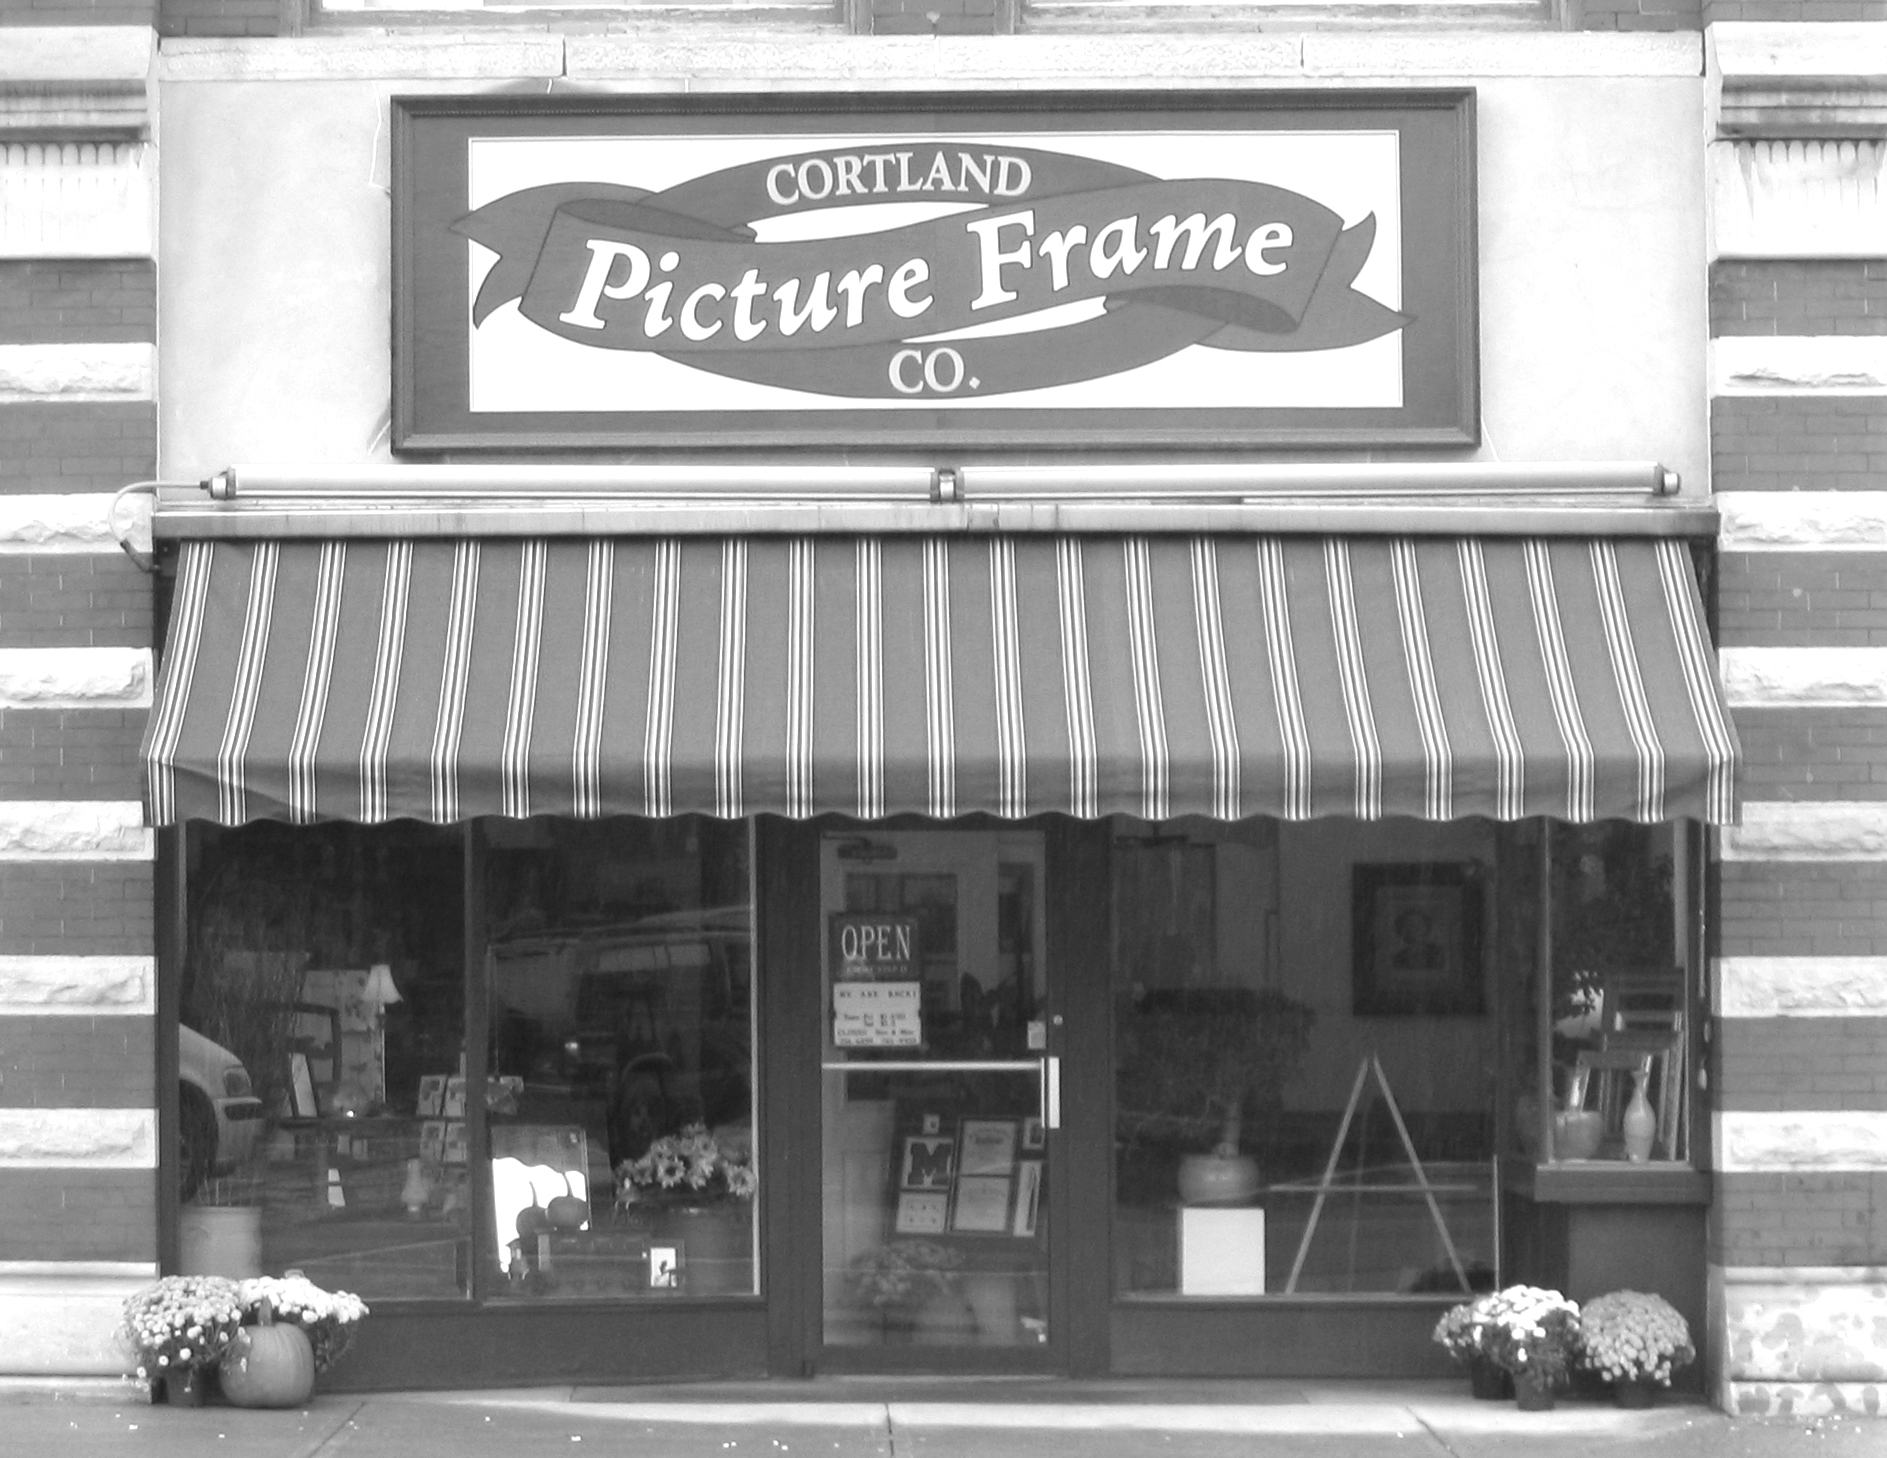 Cortland Picture Frame Co.